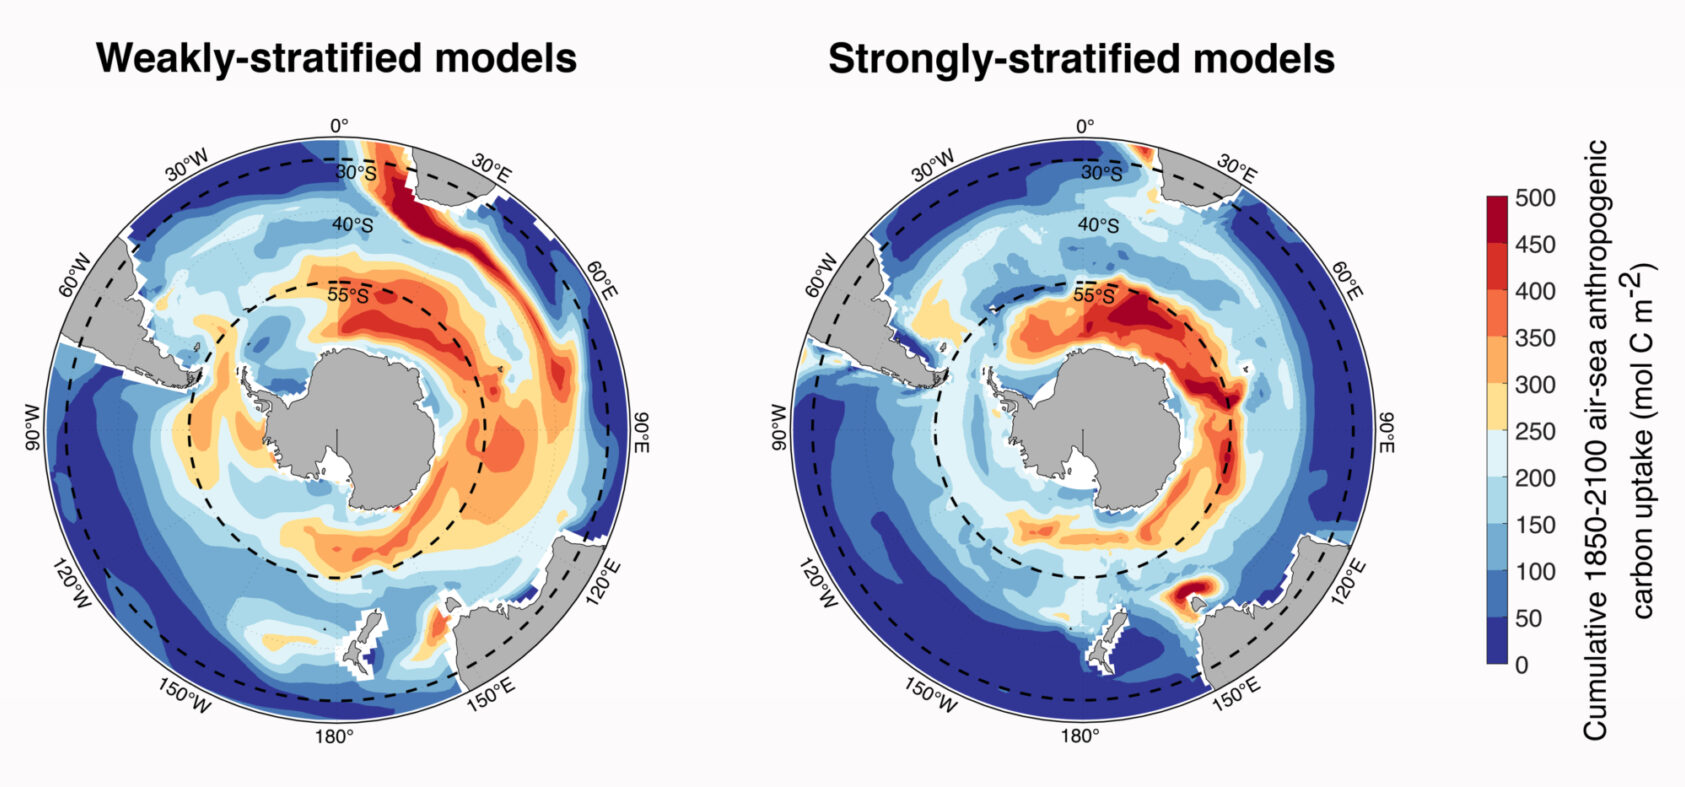 Adapted from Bourgeois et al. (2022), Cumulative uptake of anthropogenic carbon simulated by climate models during the 1850–2100 period using the high-emission scenario (RCP8.5). Red areas depict high uptake of carbon by the Ocean. On the left, the weakly-stratified models show a stronger carbon uptake between 30°S and 55°S than the strongly-stratified models on the right., Featured nature bildefil, , 